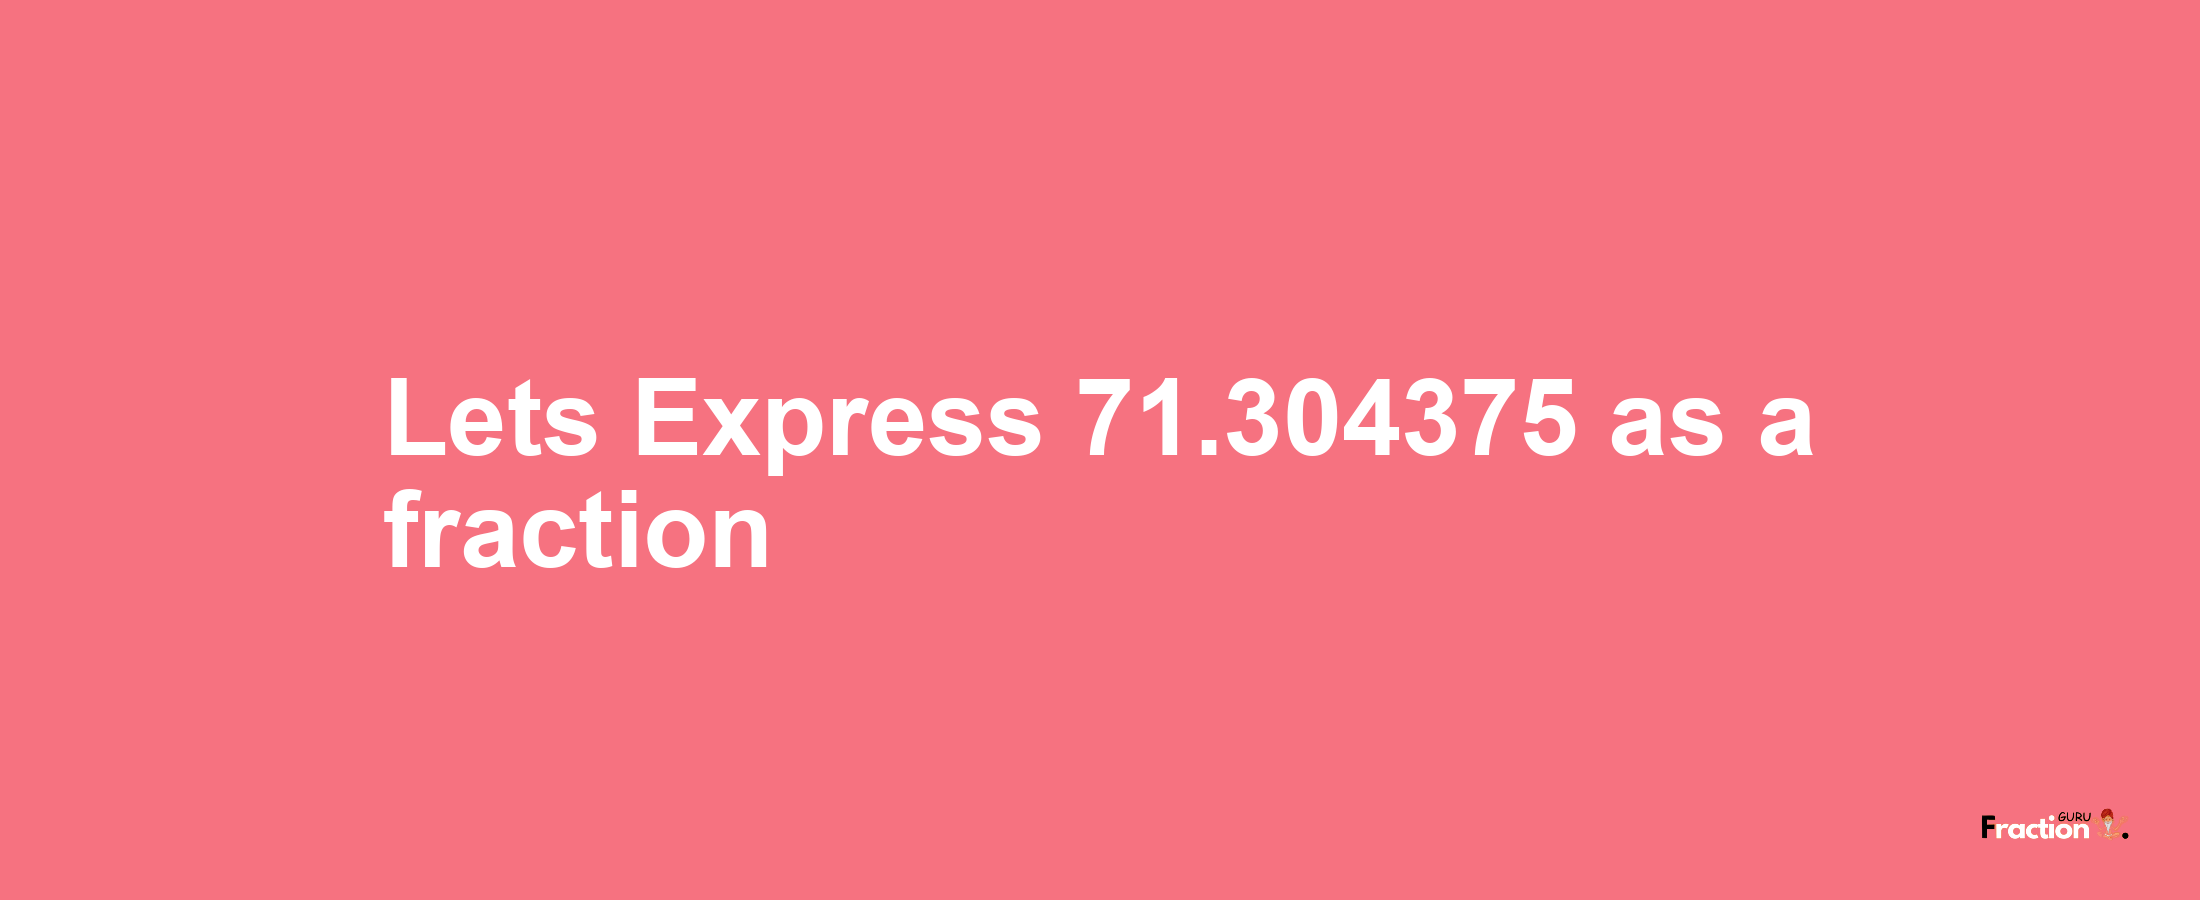 Lets Express 71.304375 as afraction